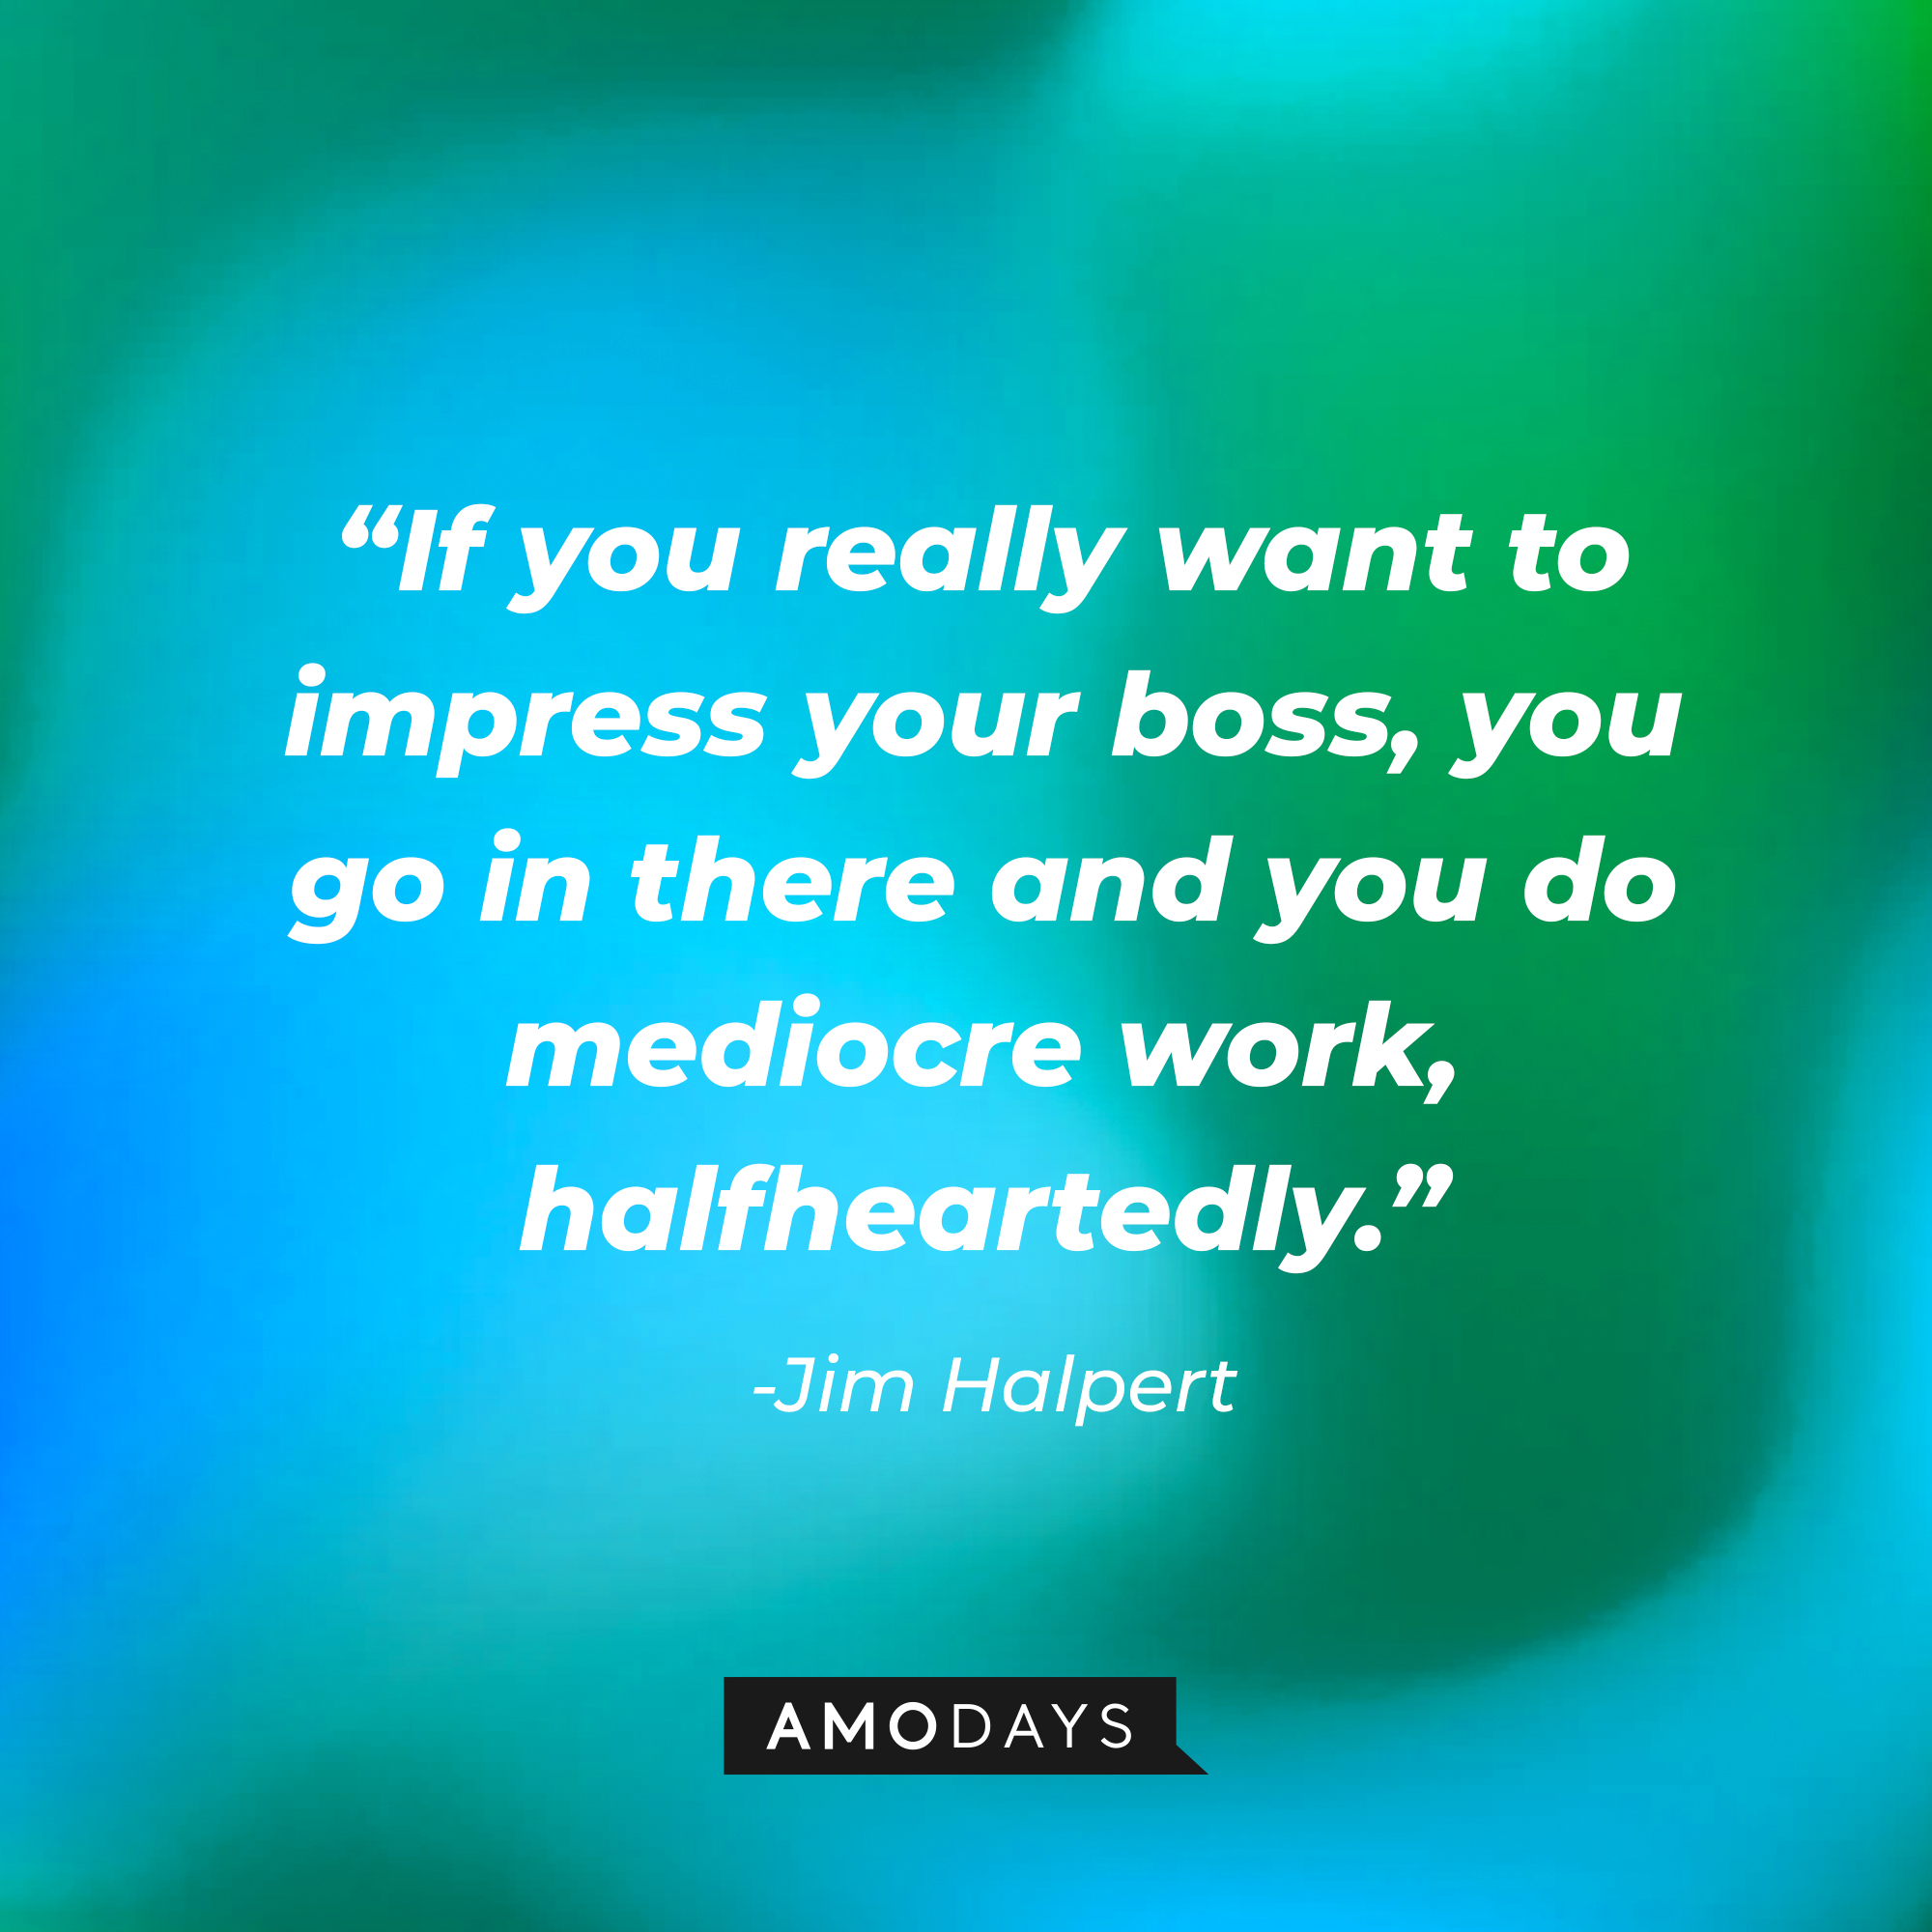 Jim Halpert’s quote: “If you really want to impress your boss, you go in there and you do mediocre work, halfheartedly.” | Source: AmoDays